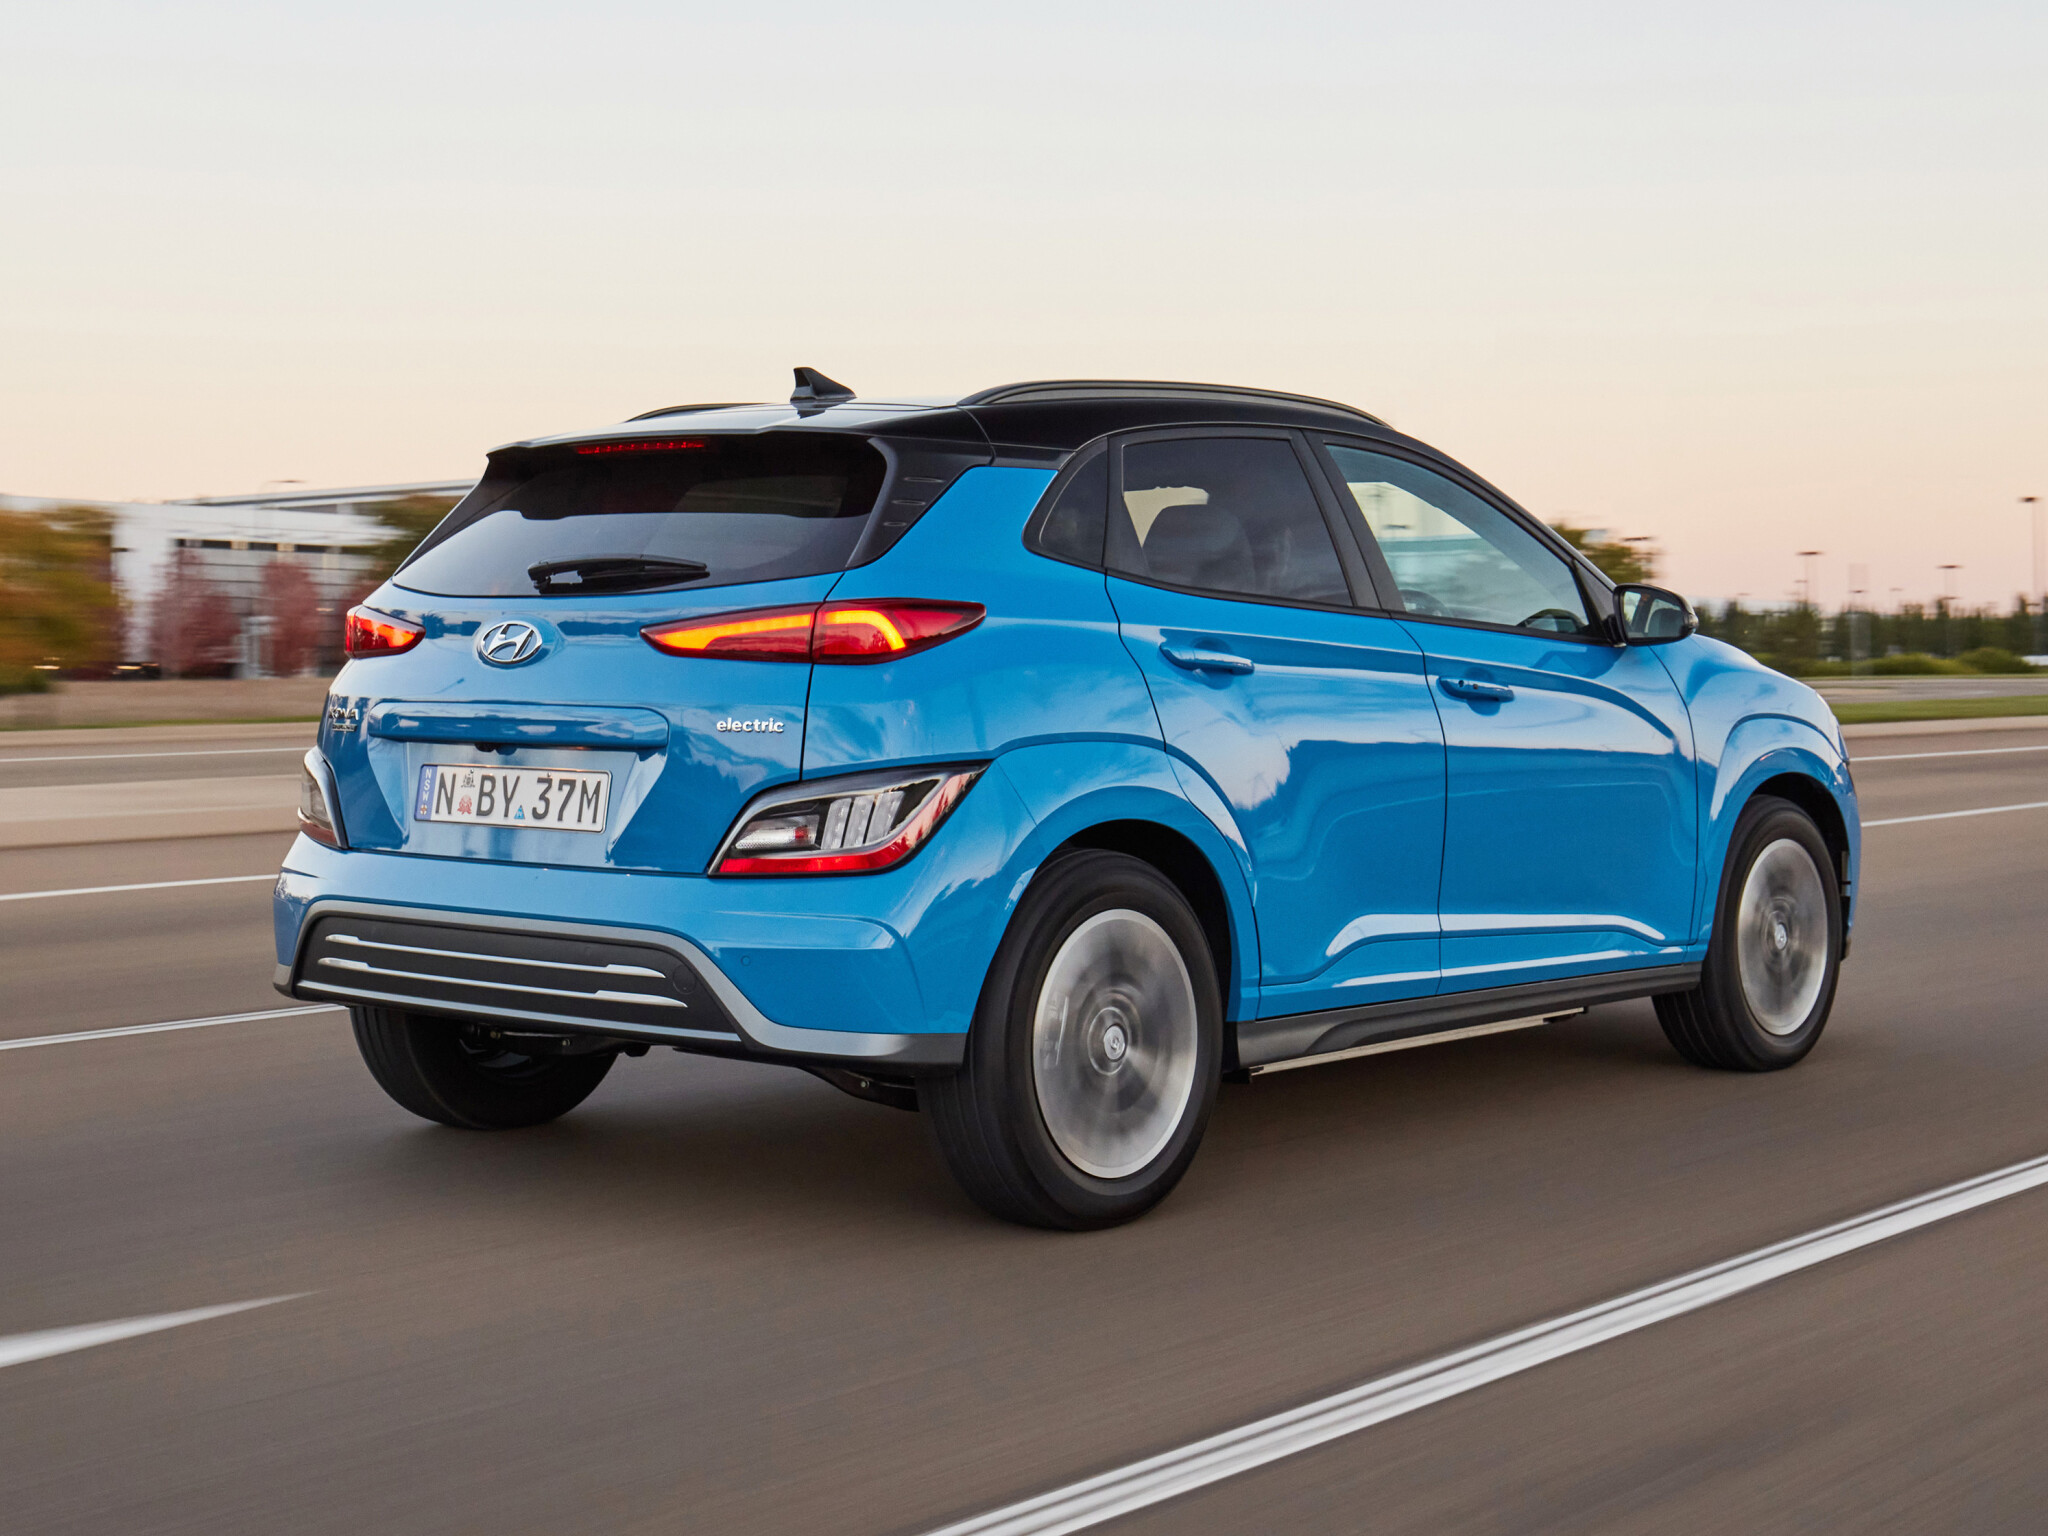 Hyundai's Kona EV is the car you didn't know you were waiting for